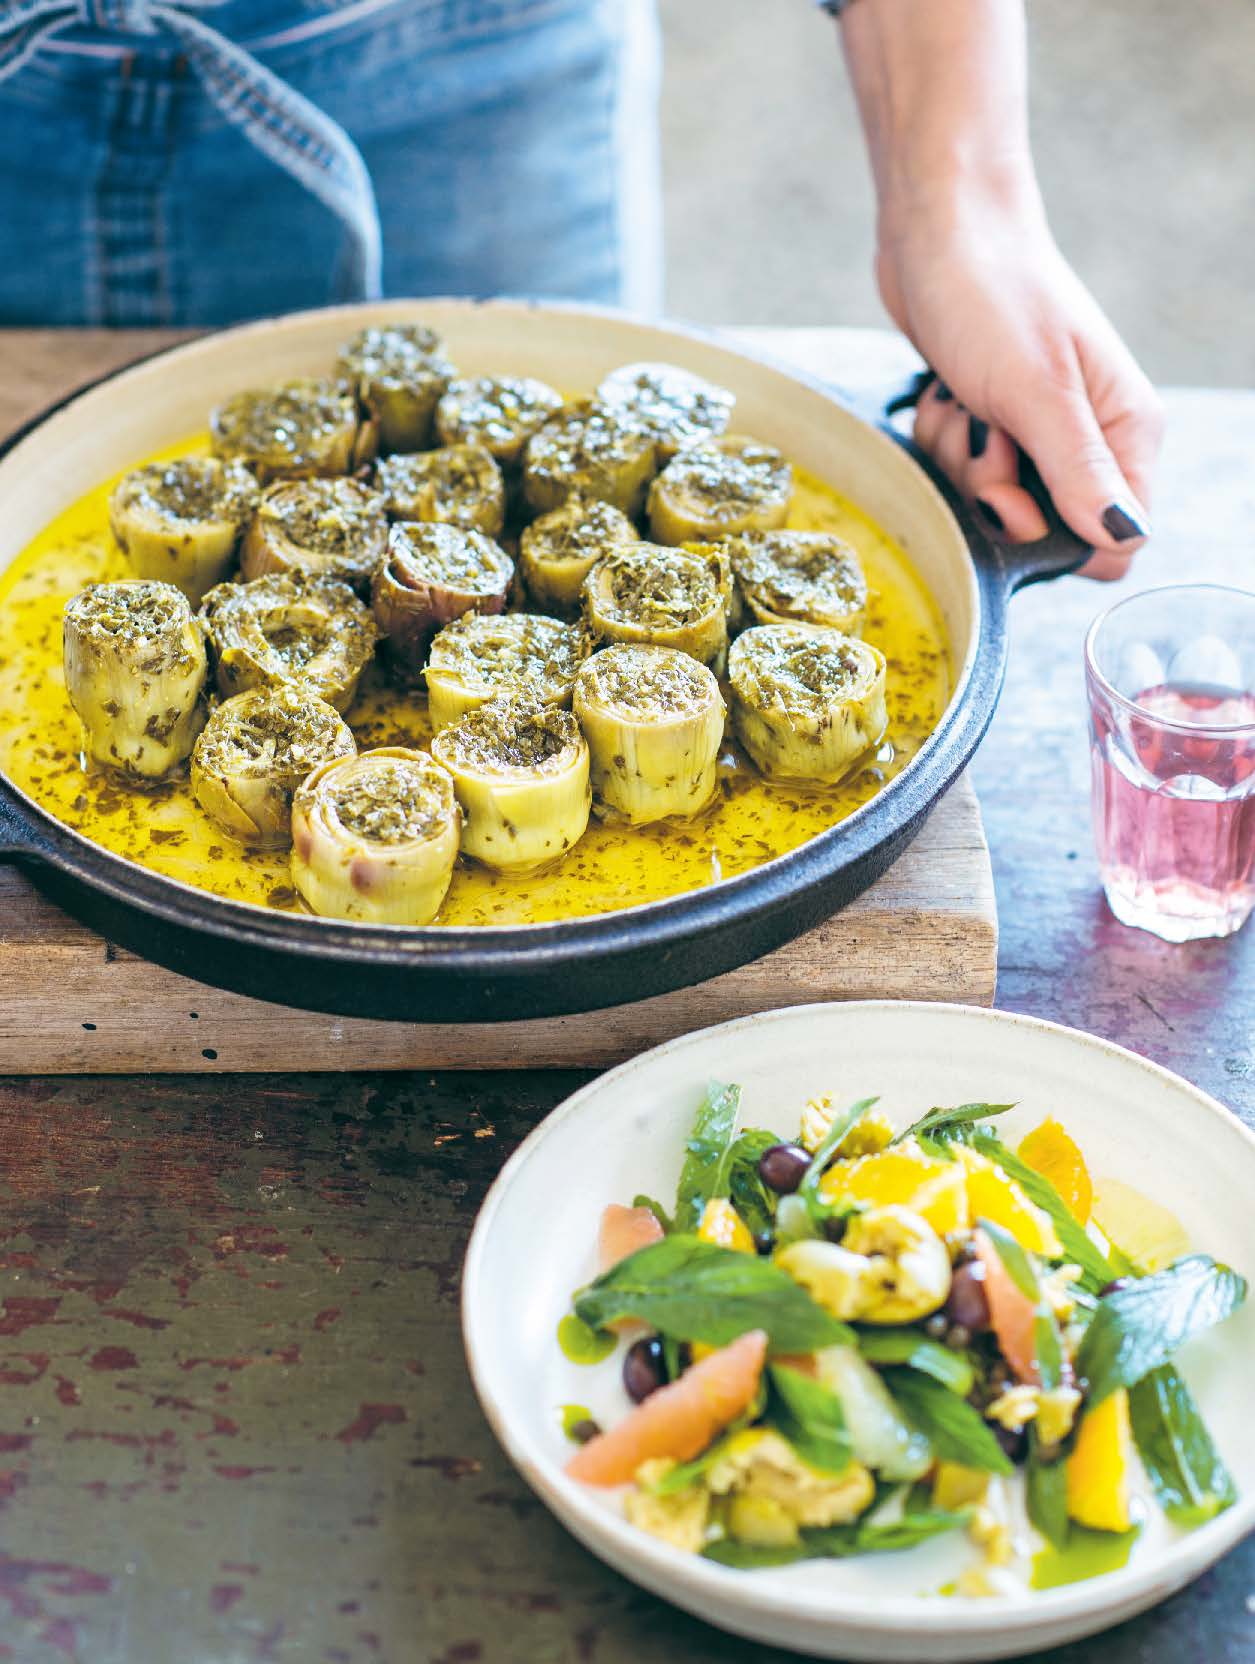 Stuffed baby artichokes with olive, citrus and herb salad